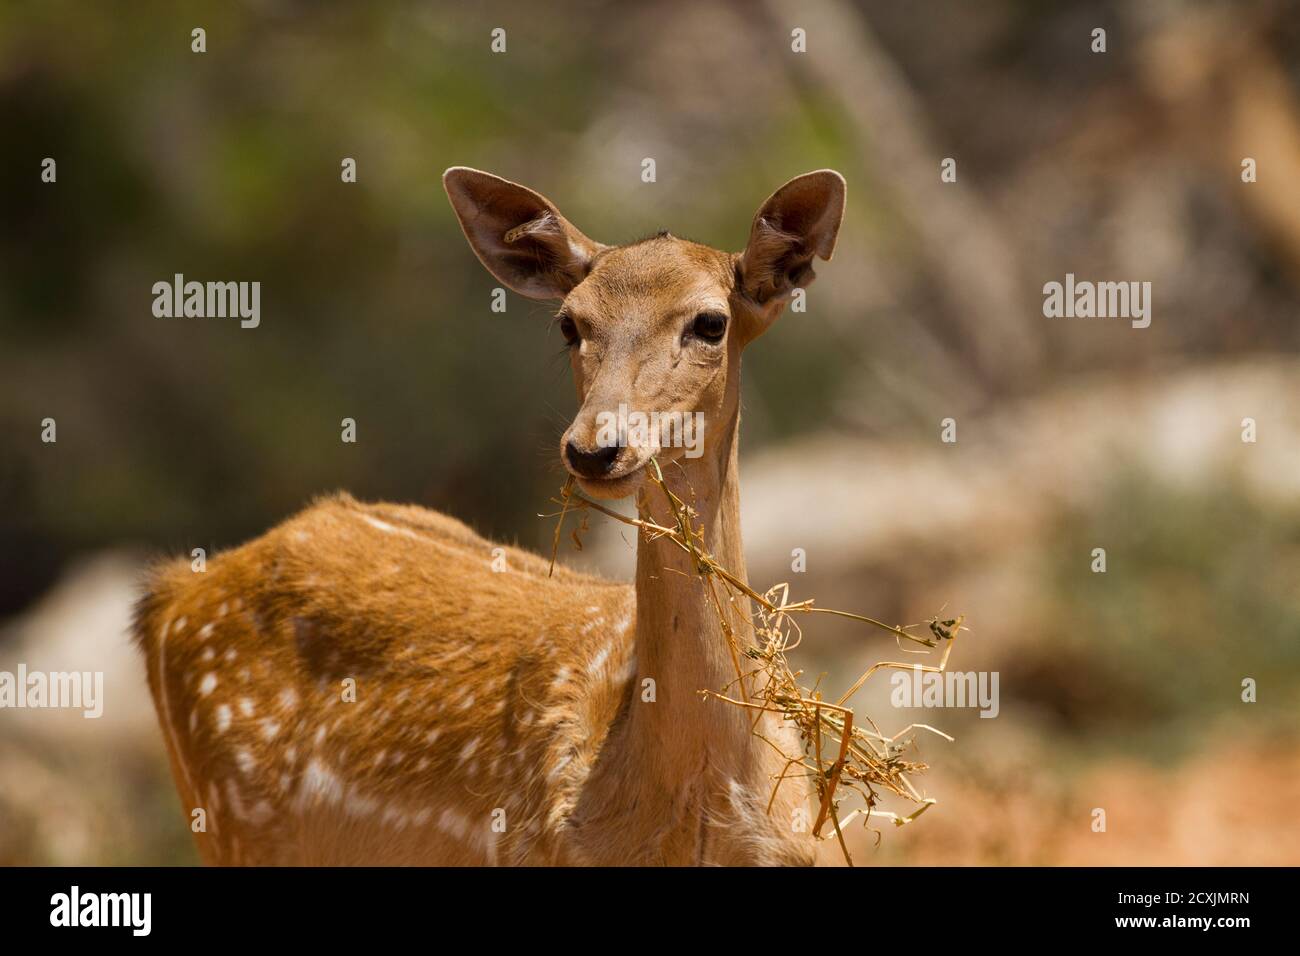 Female Mesopotamian Fallow deer (Dama mesopotamica) Photographed in Israel Carmel forest in August Stock Photo